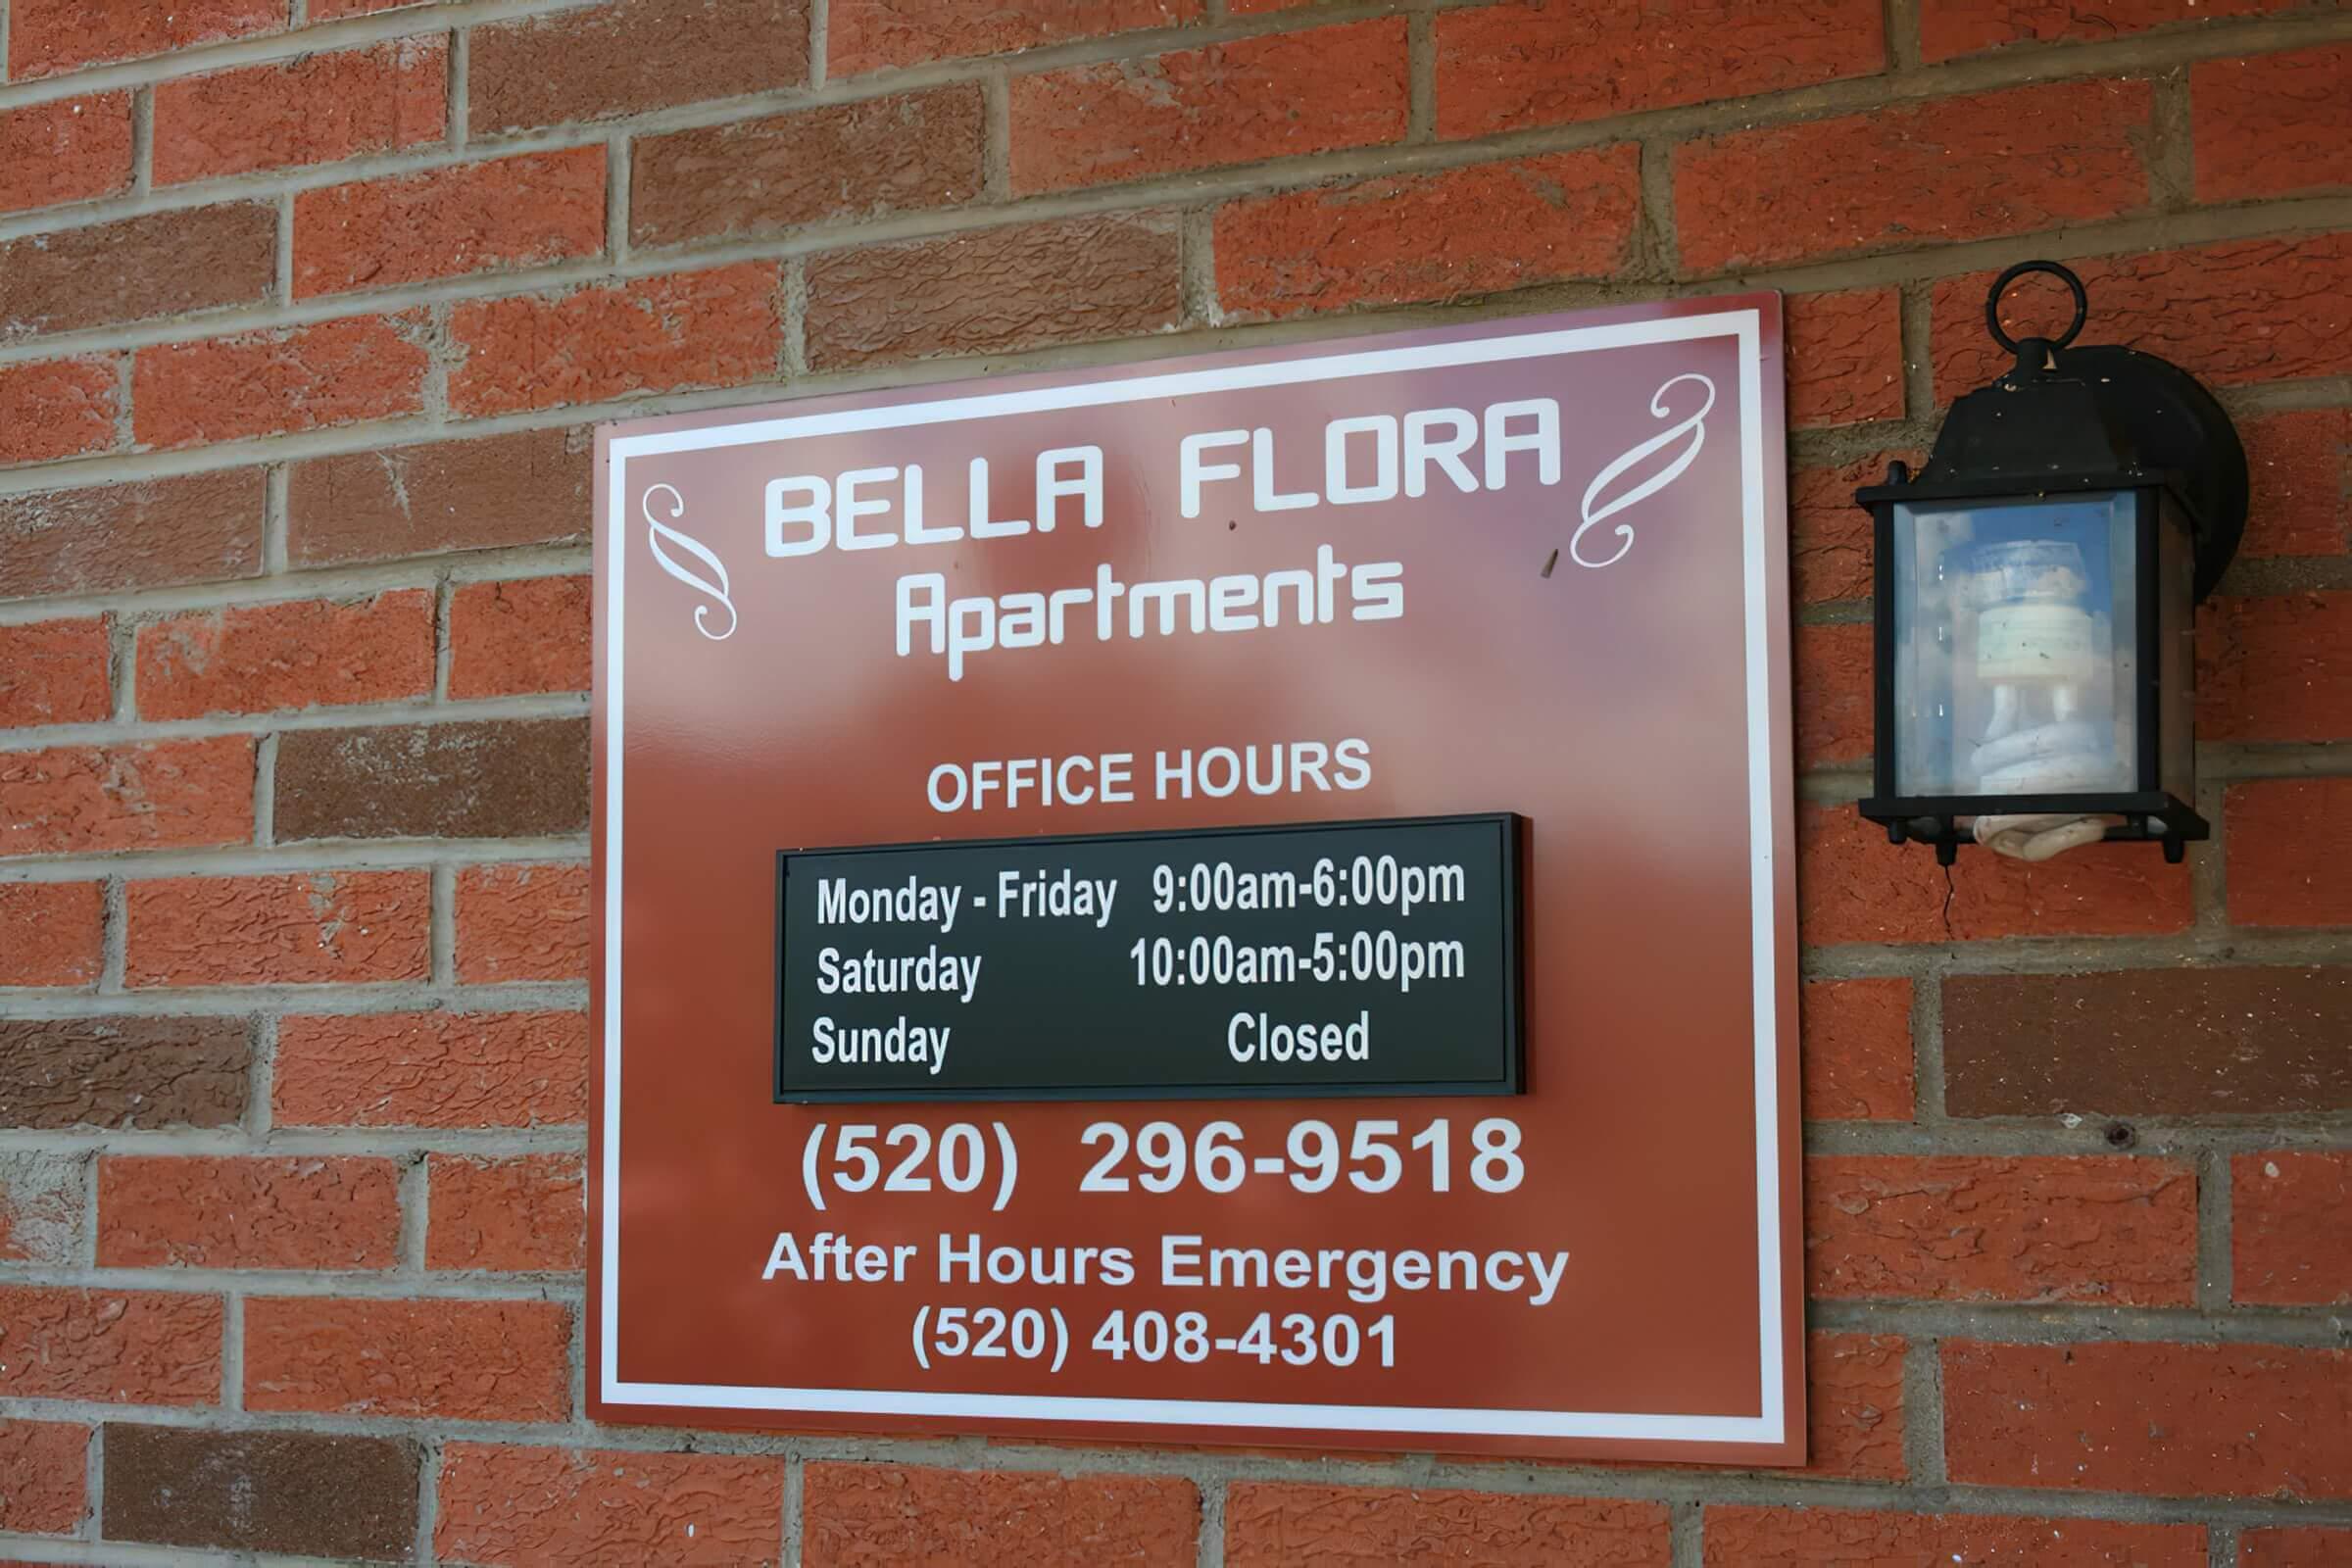 WELCOME HOME TO BELLA FLORA APARTMENTS